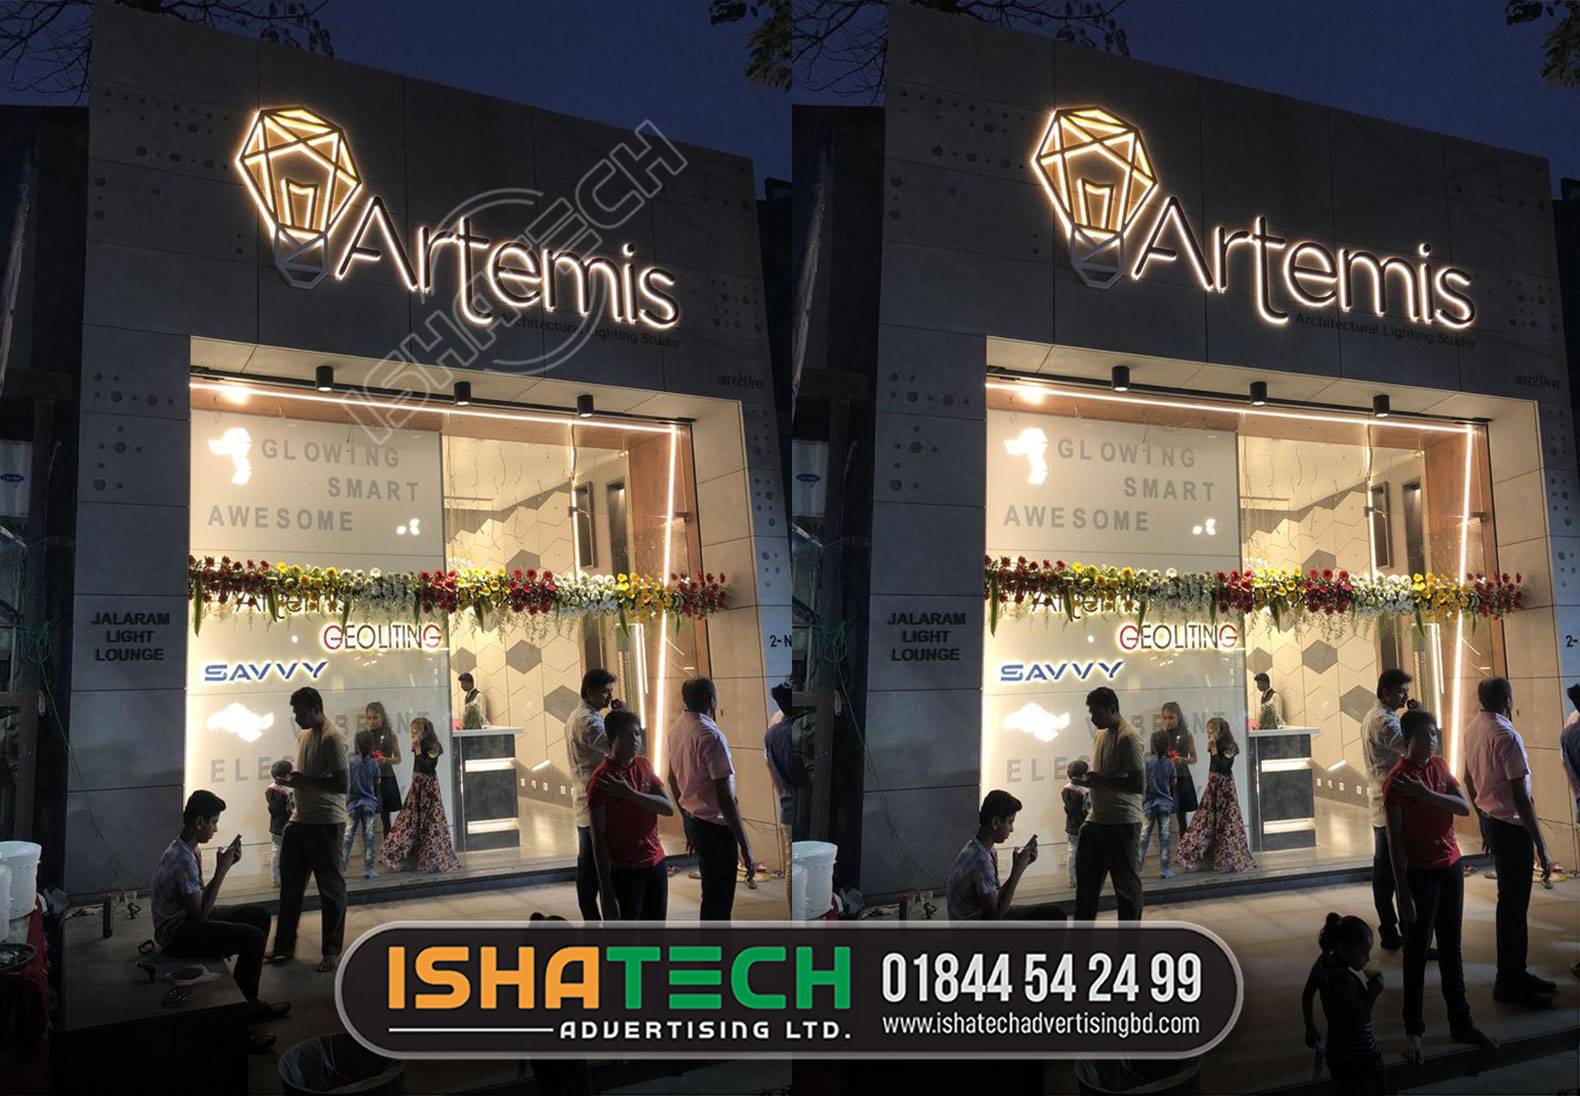 MIRPUR SHOPPING MALL ARTENIS FRONT LOGO AND LETTER SIGNAGE CREATE FROM ISHATECH ADVERTISING LTD